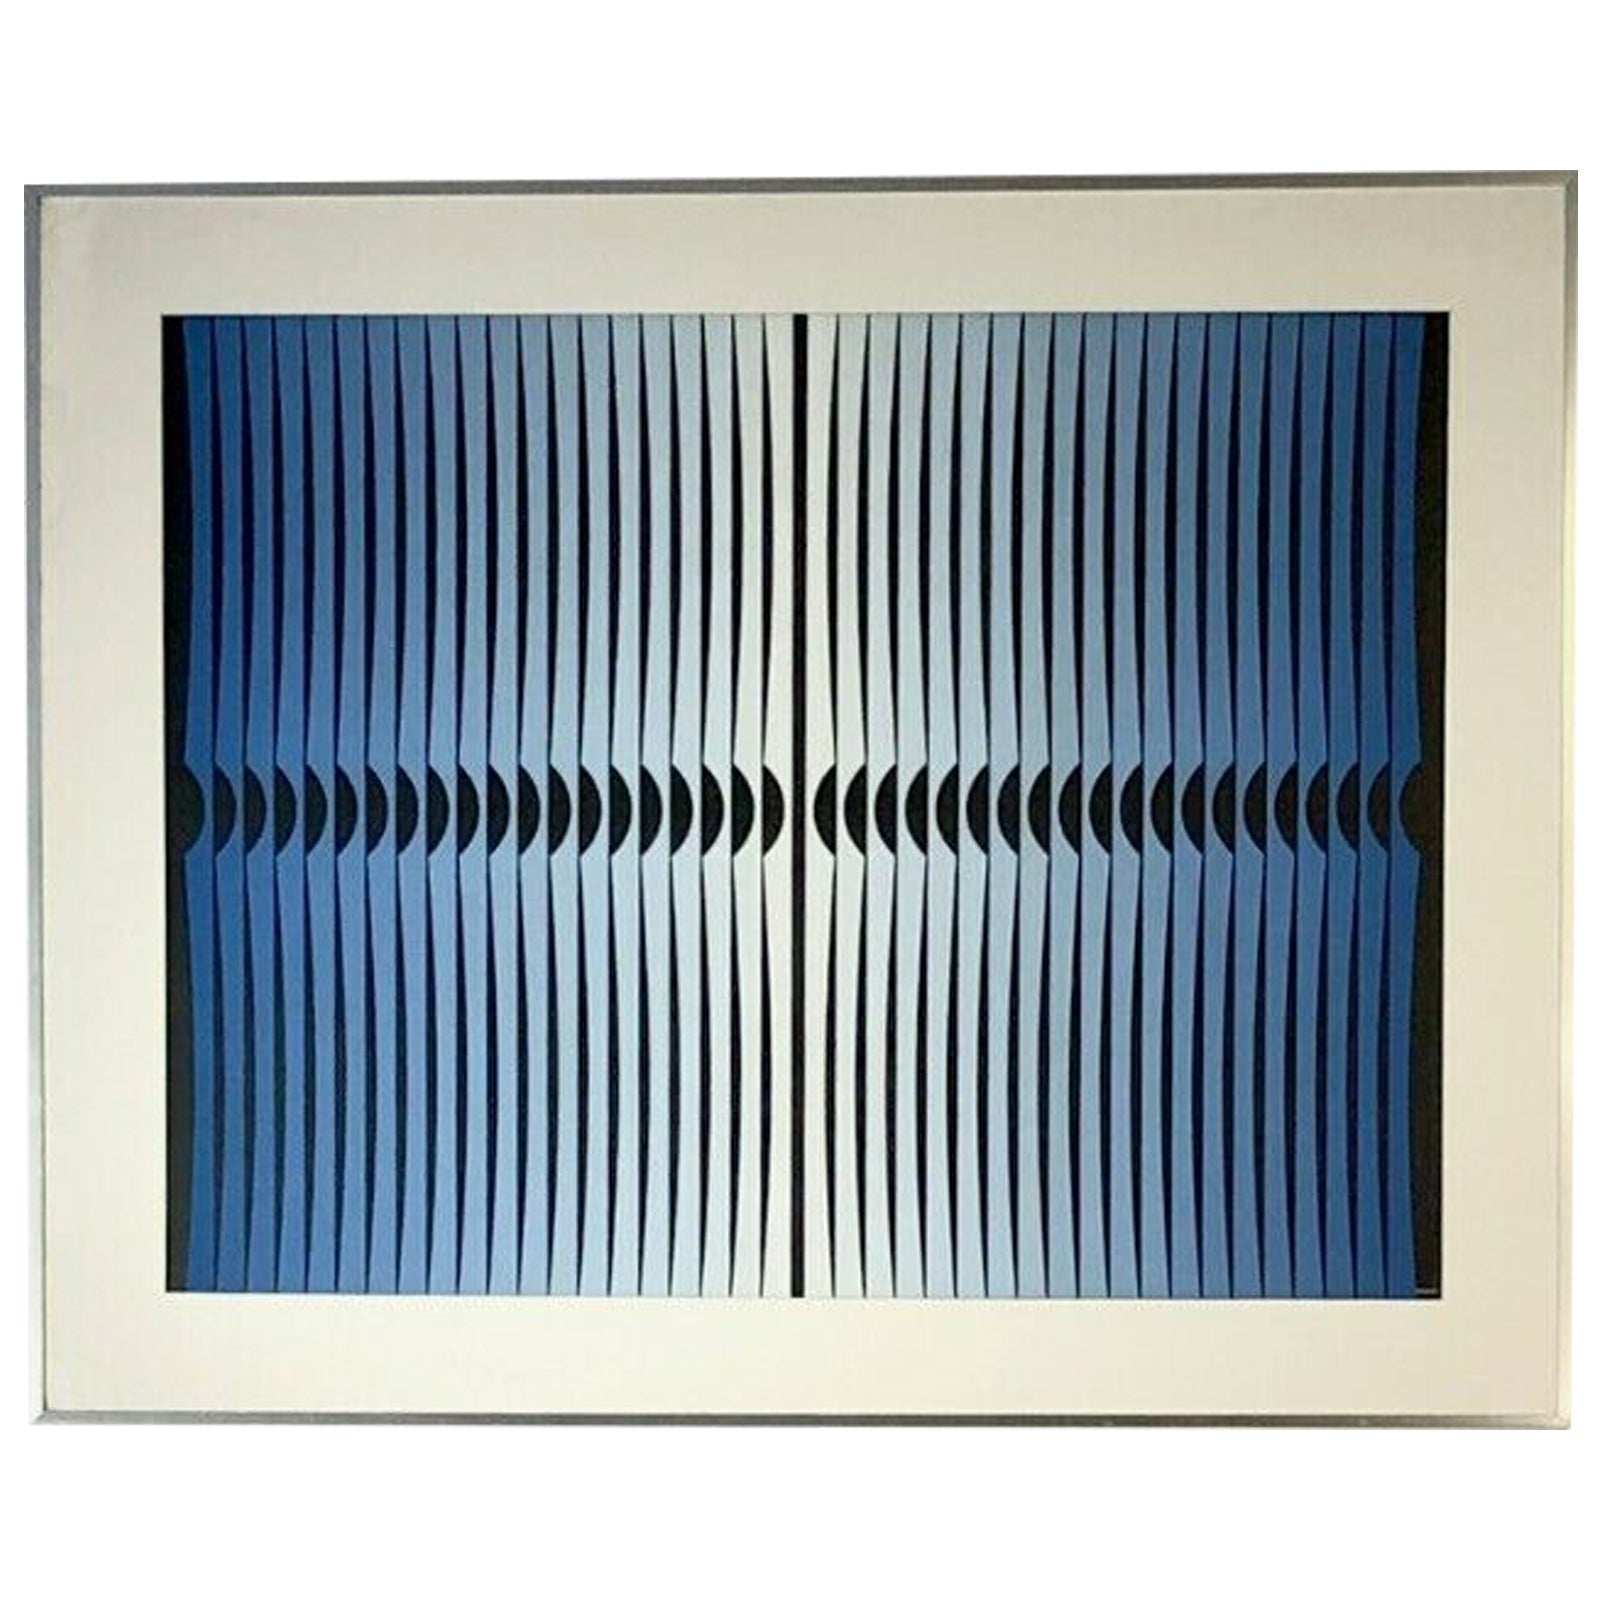 A Kinetic Optical Op-Art GOUACHE PAINTING by DORDEVIC MIODRAG, France 1960